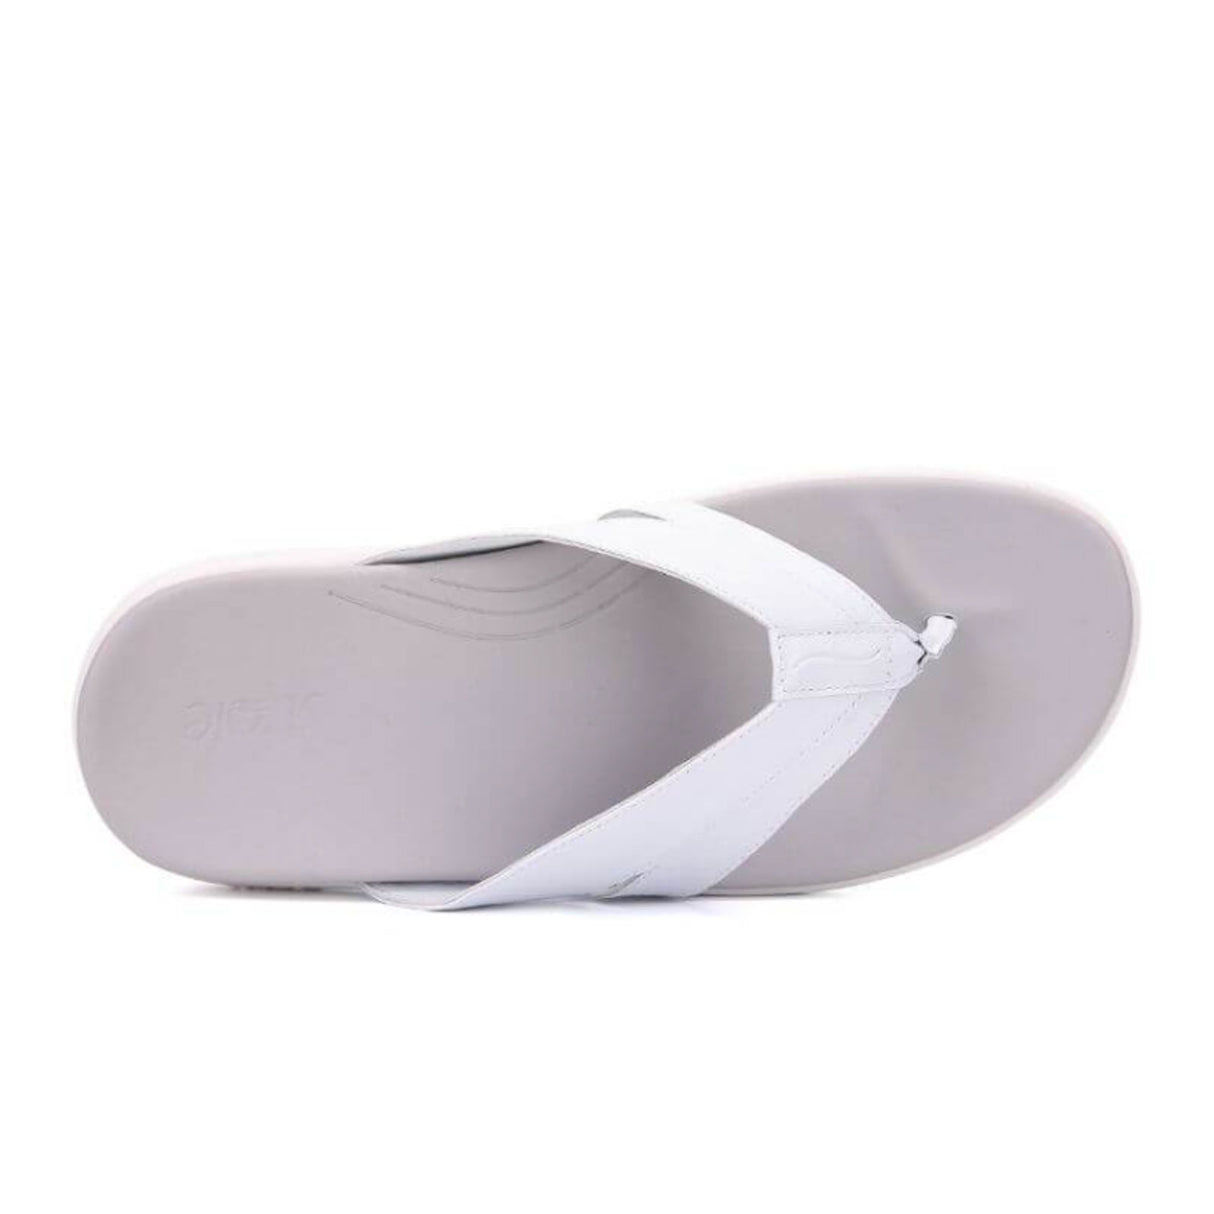 Strole Bliss Thong Sandal (Women) - White Sandals - Thong - The Heel Shoe Fitters